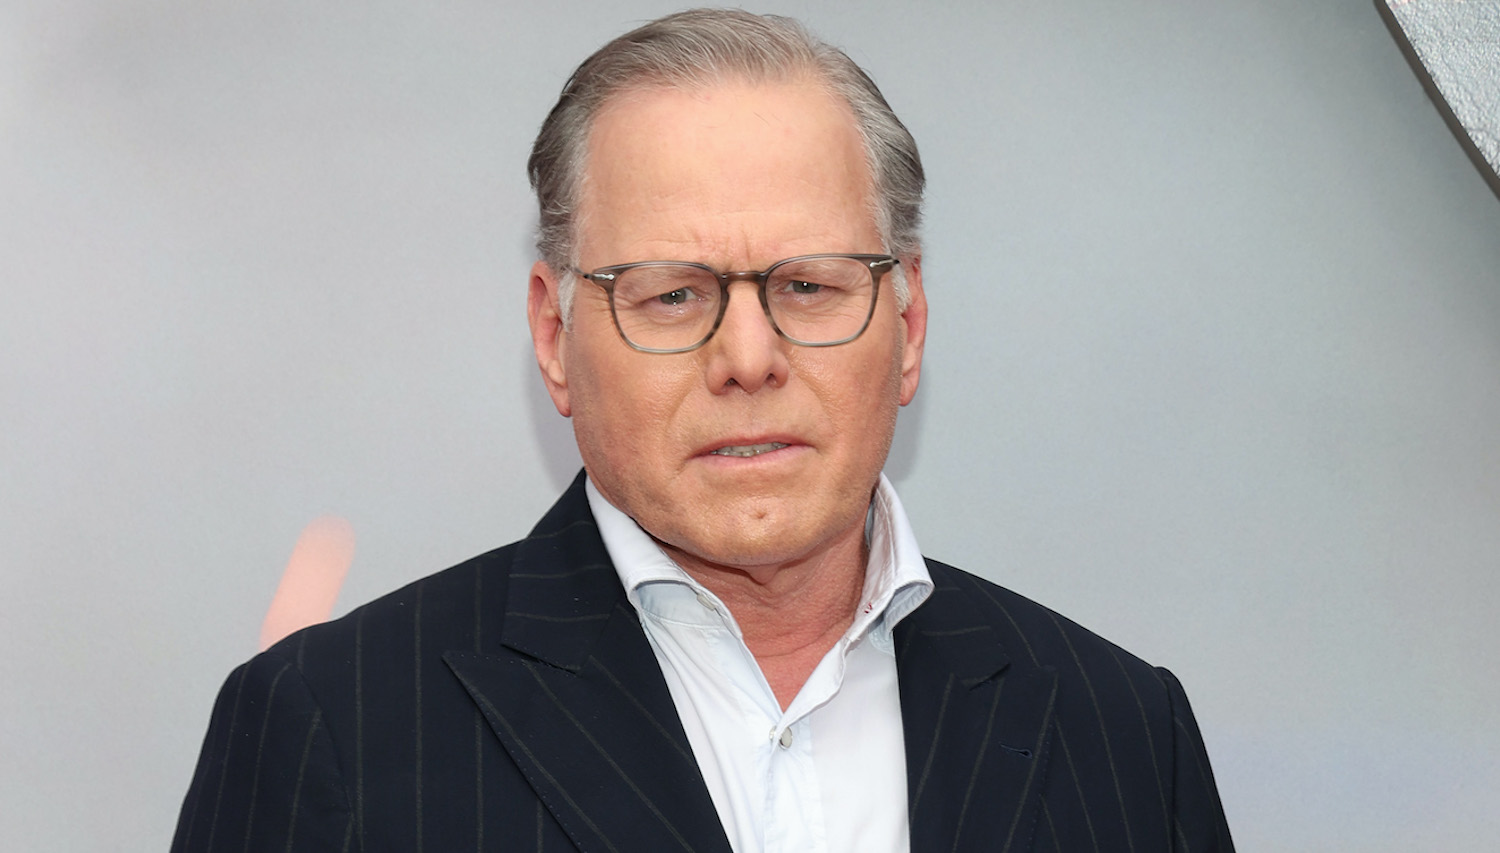 David Zaslav, President and CEO of Warner Bros. Discovery, attends the Los Angeles premiere of Warner Bros. "The Flash" at Ovation Hollywood on June 12, 2023 in Hollywood, California.